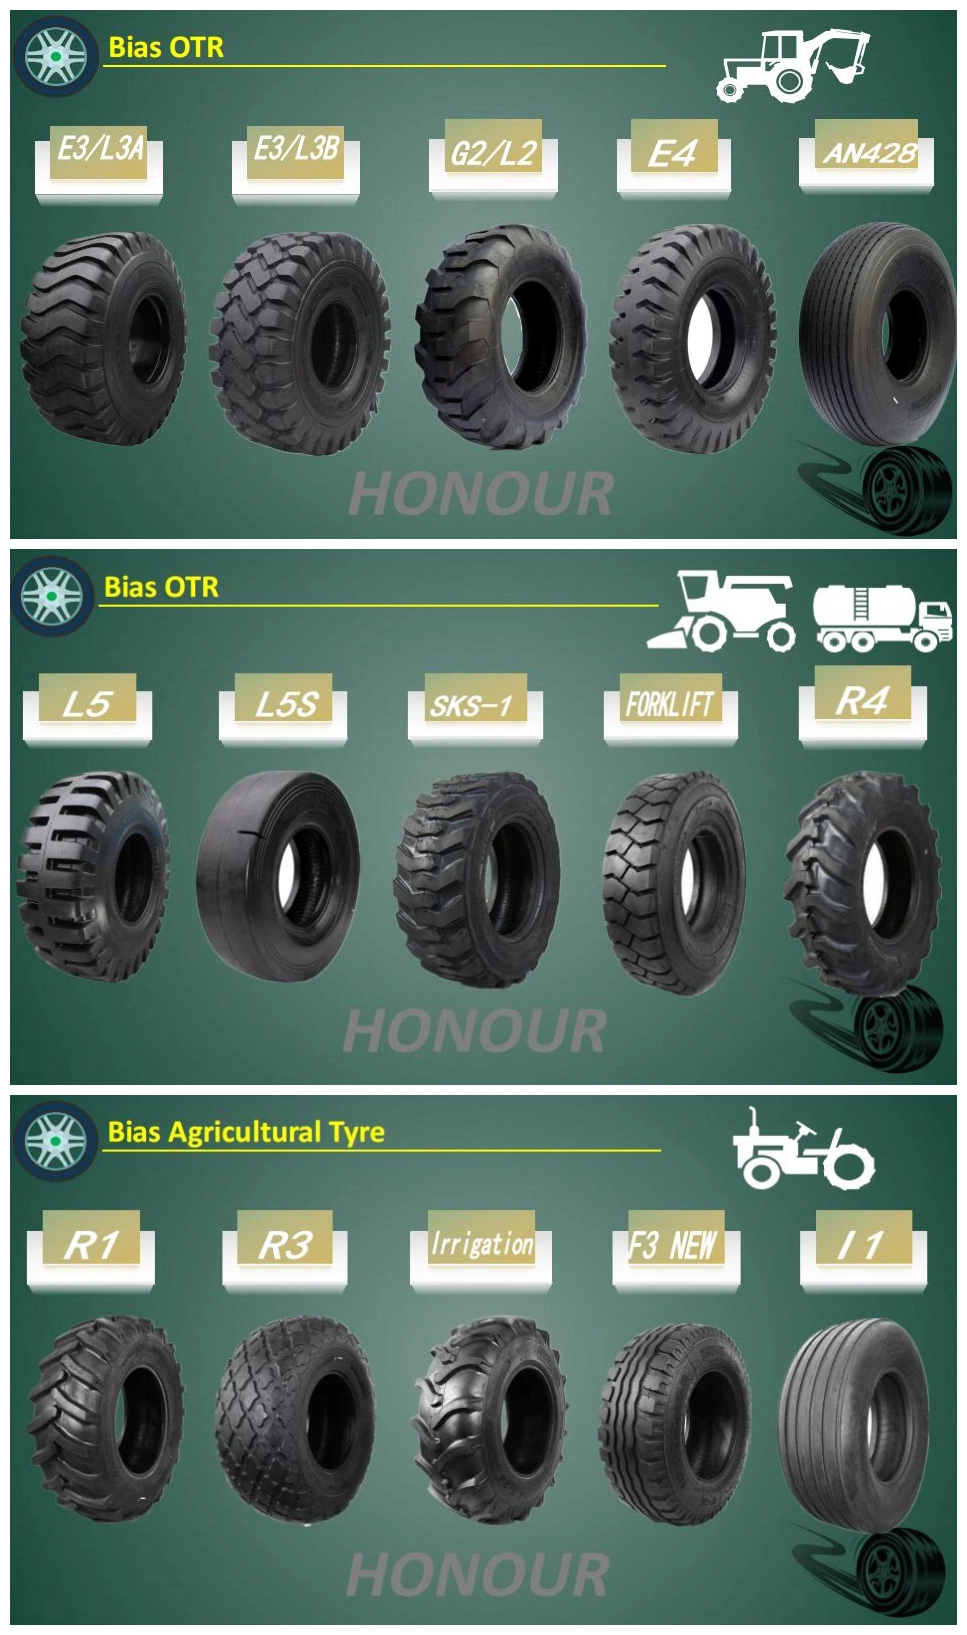 F3 Flotation Bias Agricultural Tyres Farm Implement Tires Tractor Tyre with Rim for Trailer Wagon Tanker Cart Baler (10.00/75-15.3 11.5/80-15.3)